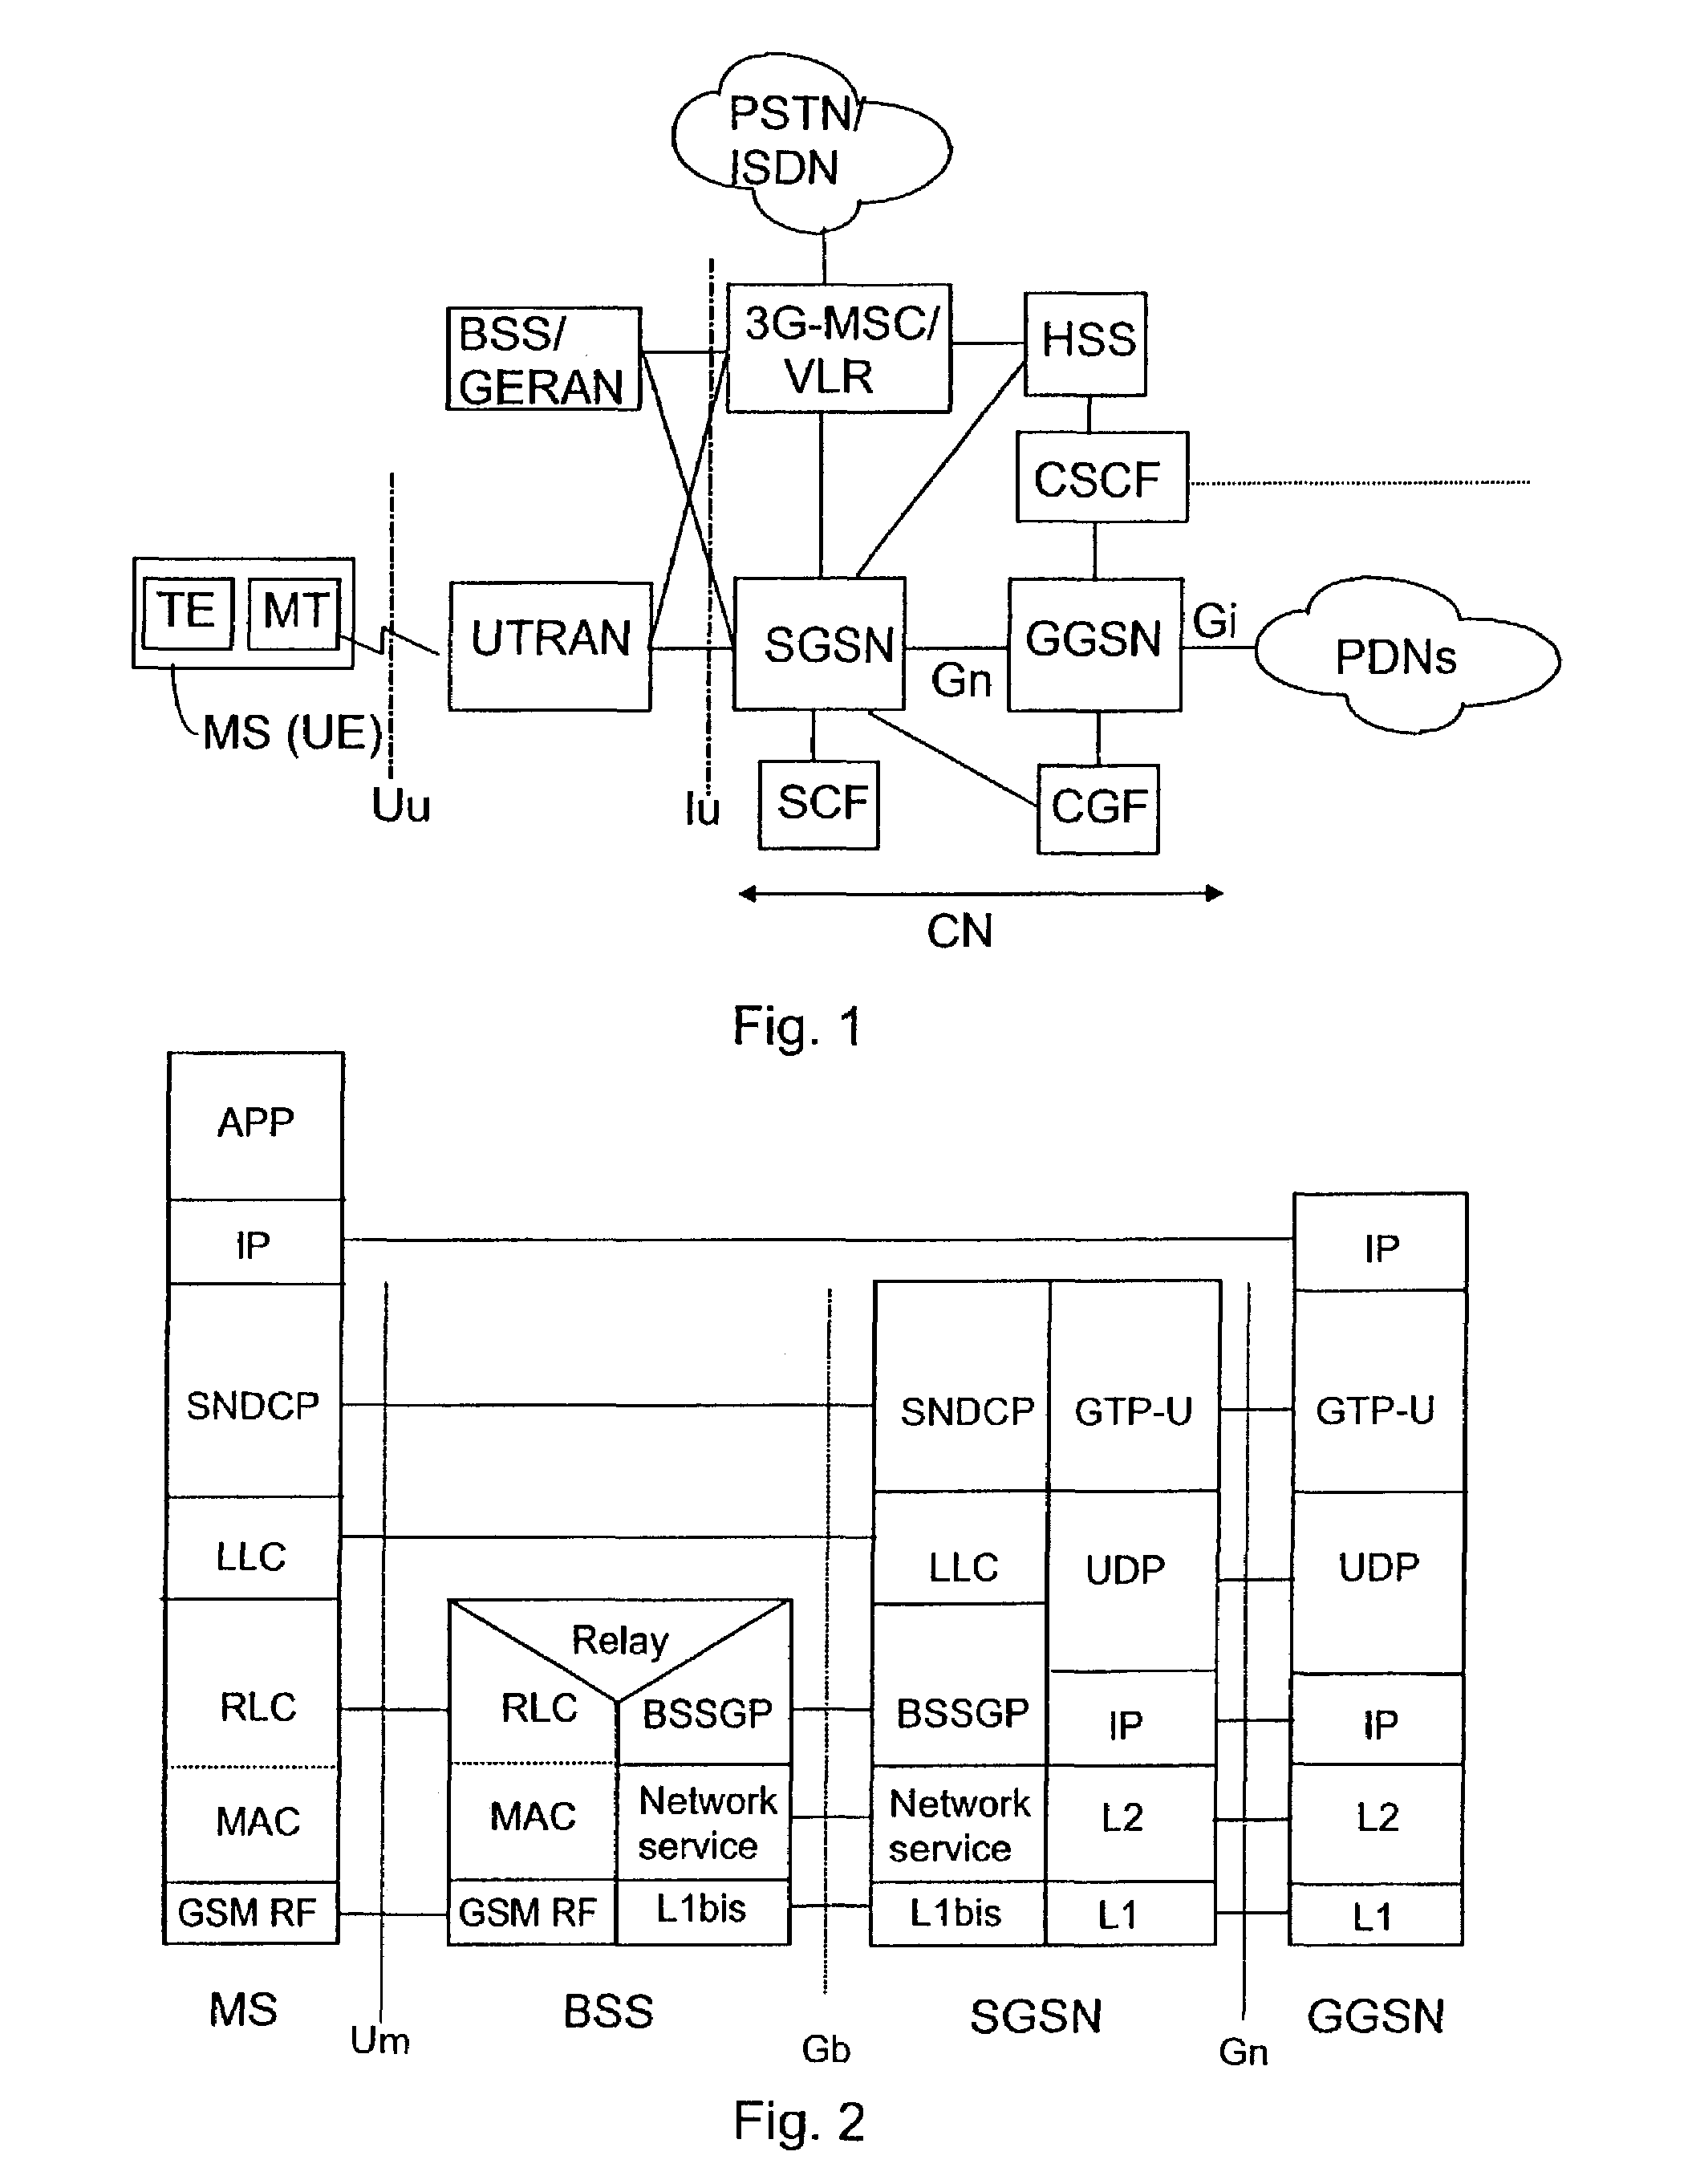 Method and system for arranging data flow control in a data transfer system